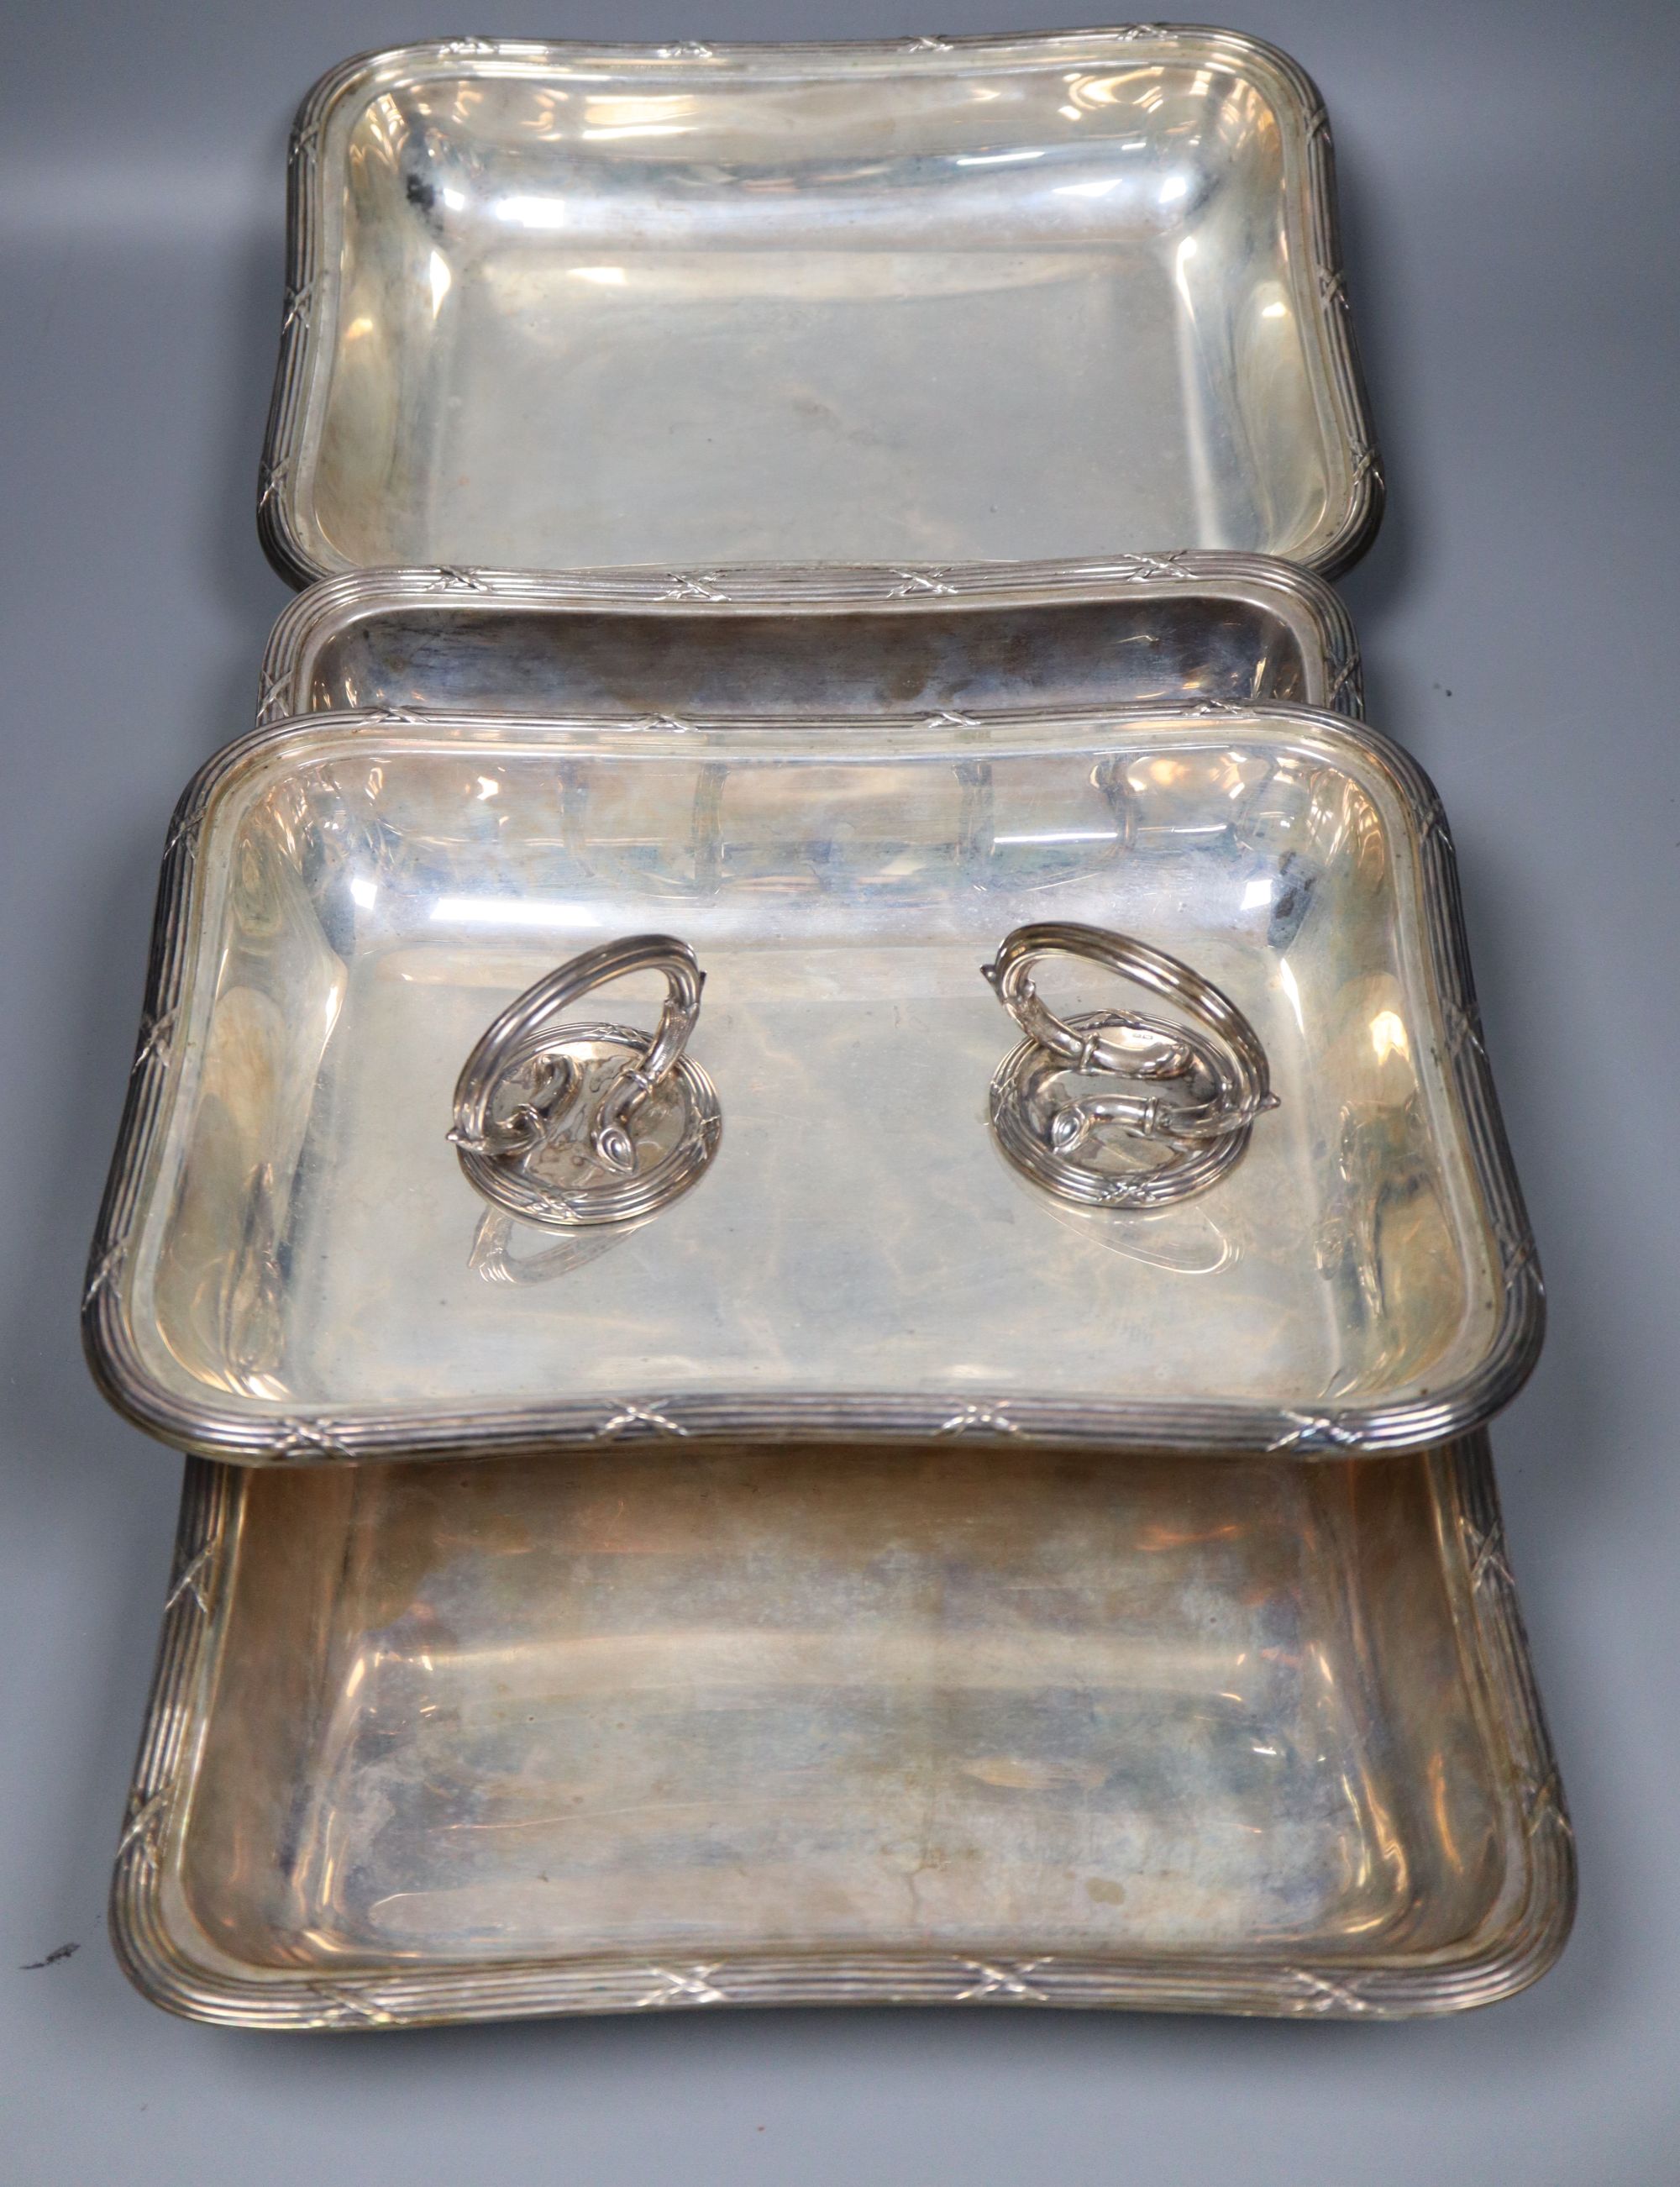 A pair of George V silver entree dishes and covers with handles and later engraved inscription, Walker & Hall, Chester, 1910/11